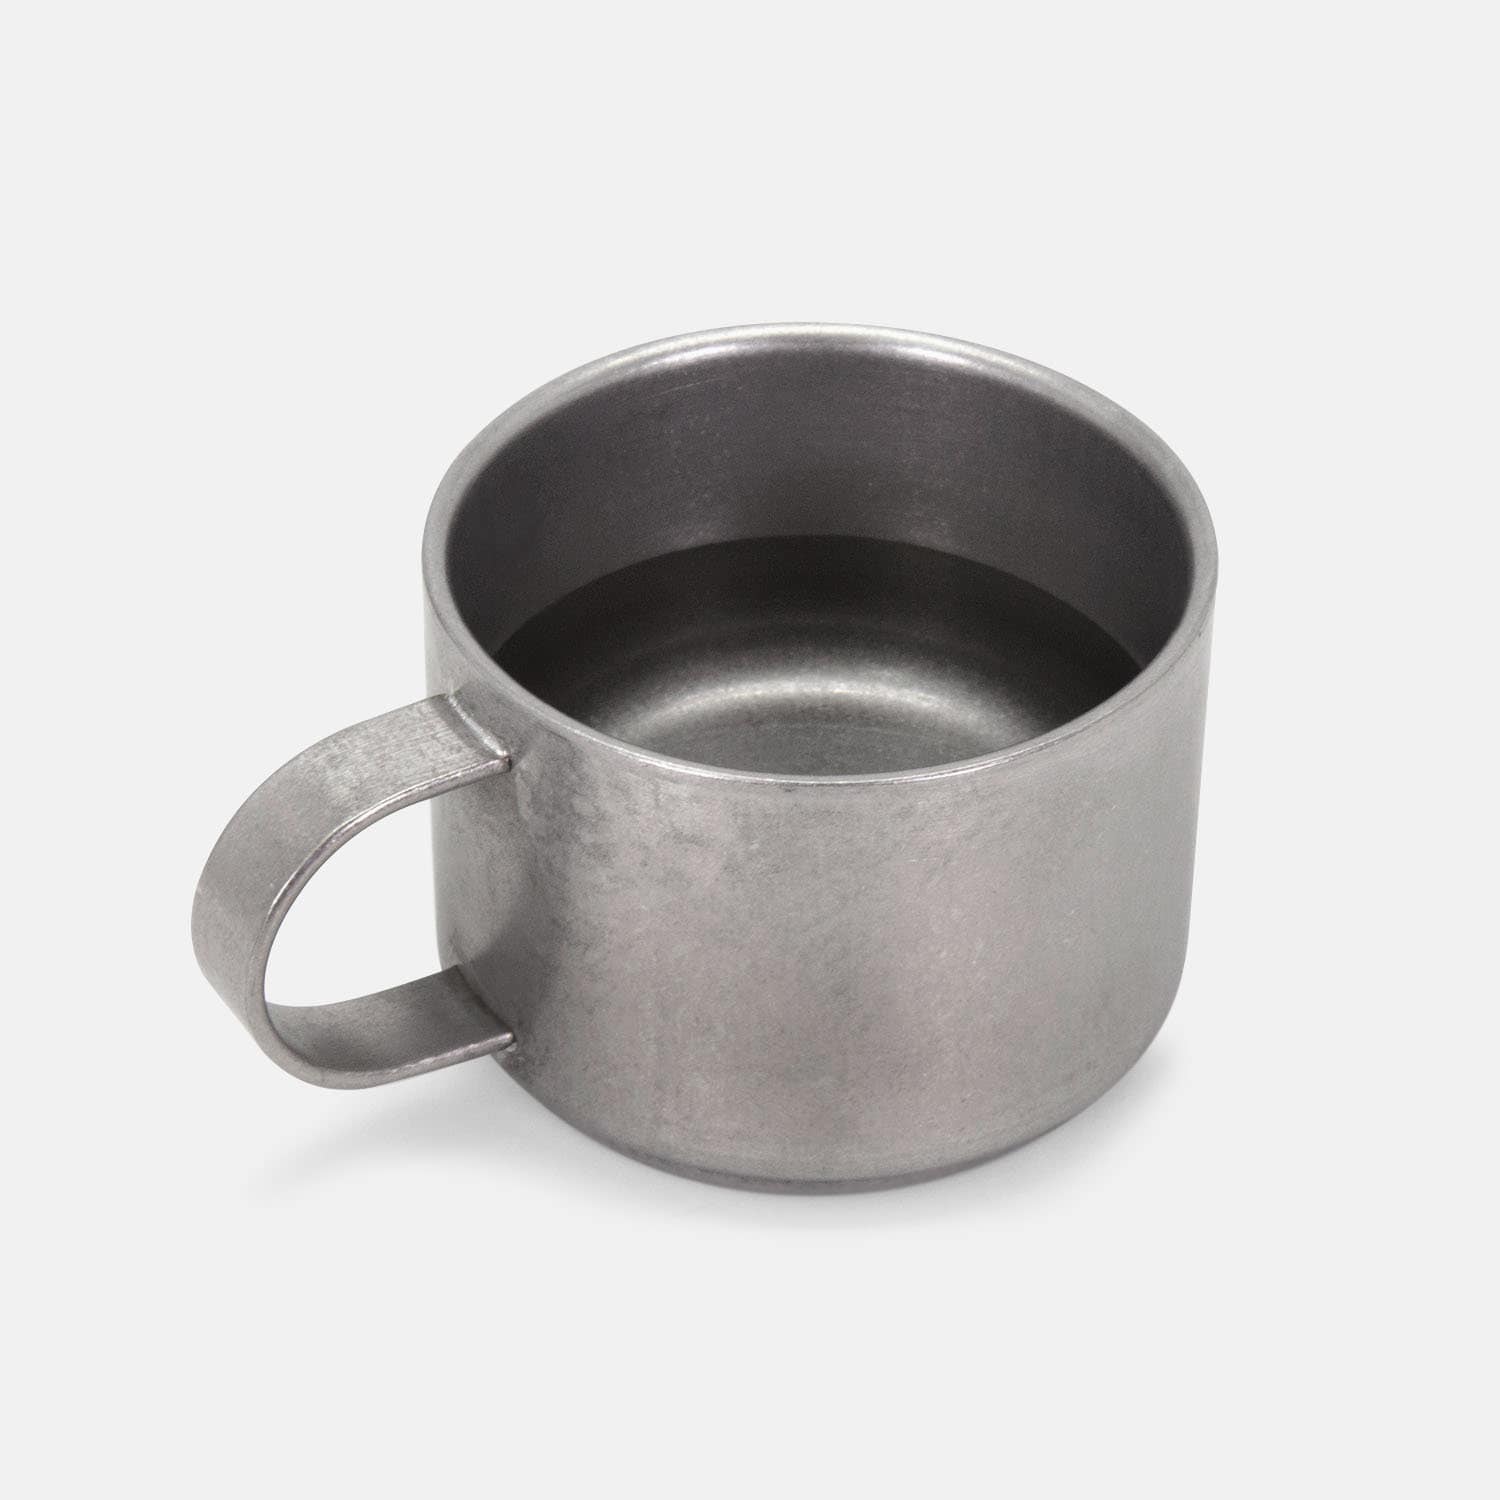 Stainless Steel Good Quality Coffee Cup Holder/Tea Cup Stand